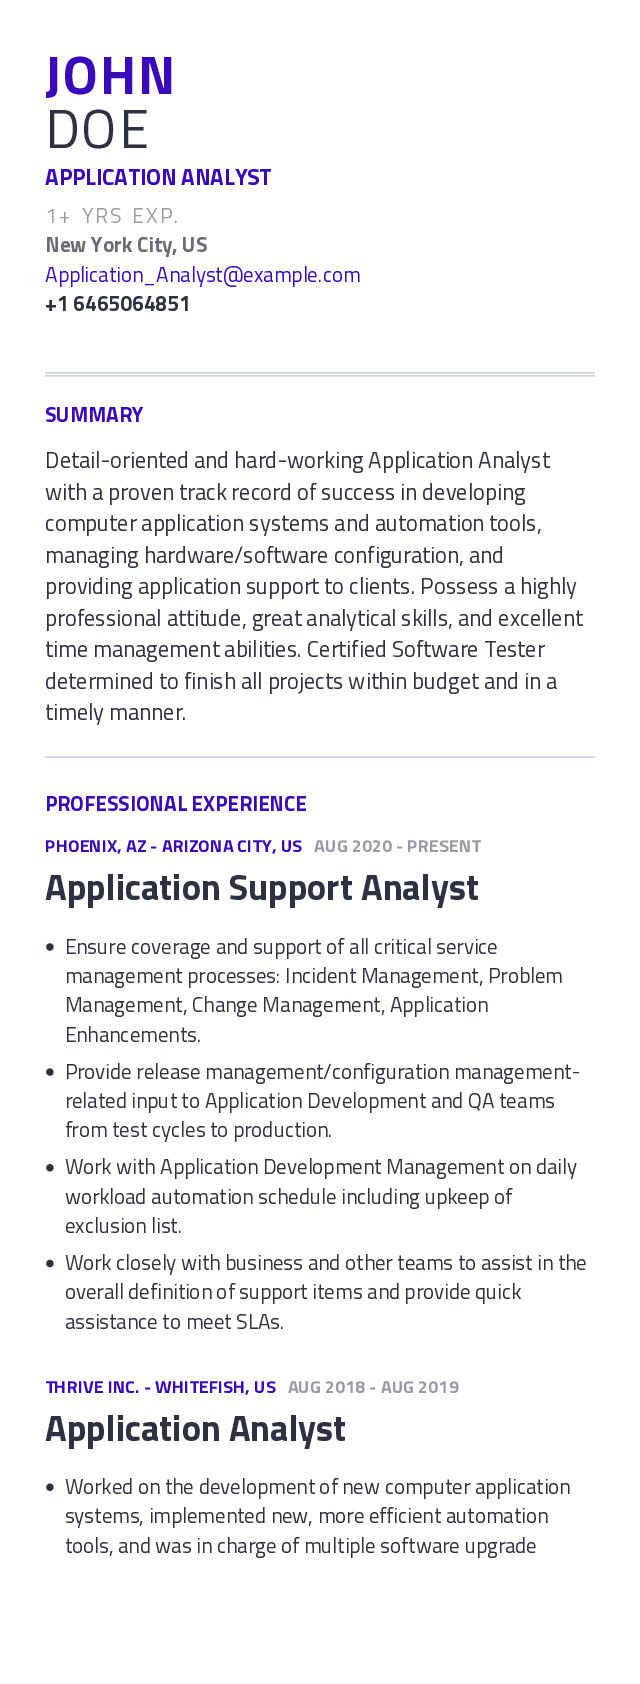 Application Support Technical Analyst Resume Samples Application Analyst Resume Example with Content Sample Craftmycv